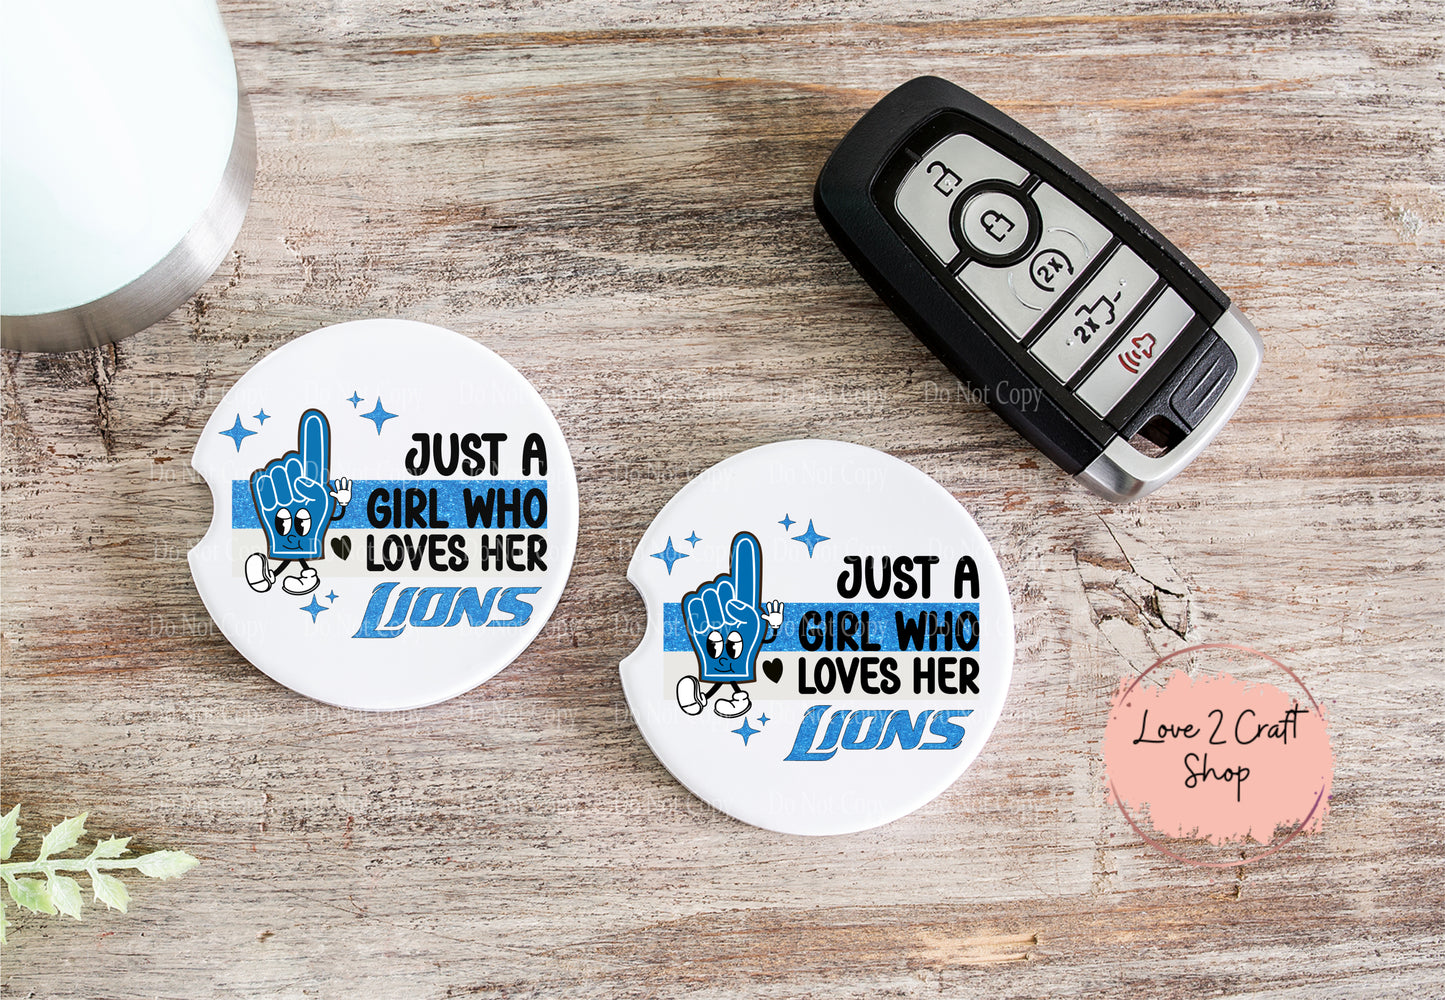 Just a girl who loves her Lions - Hand Car Coasters